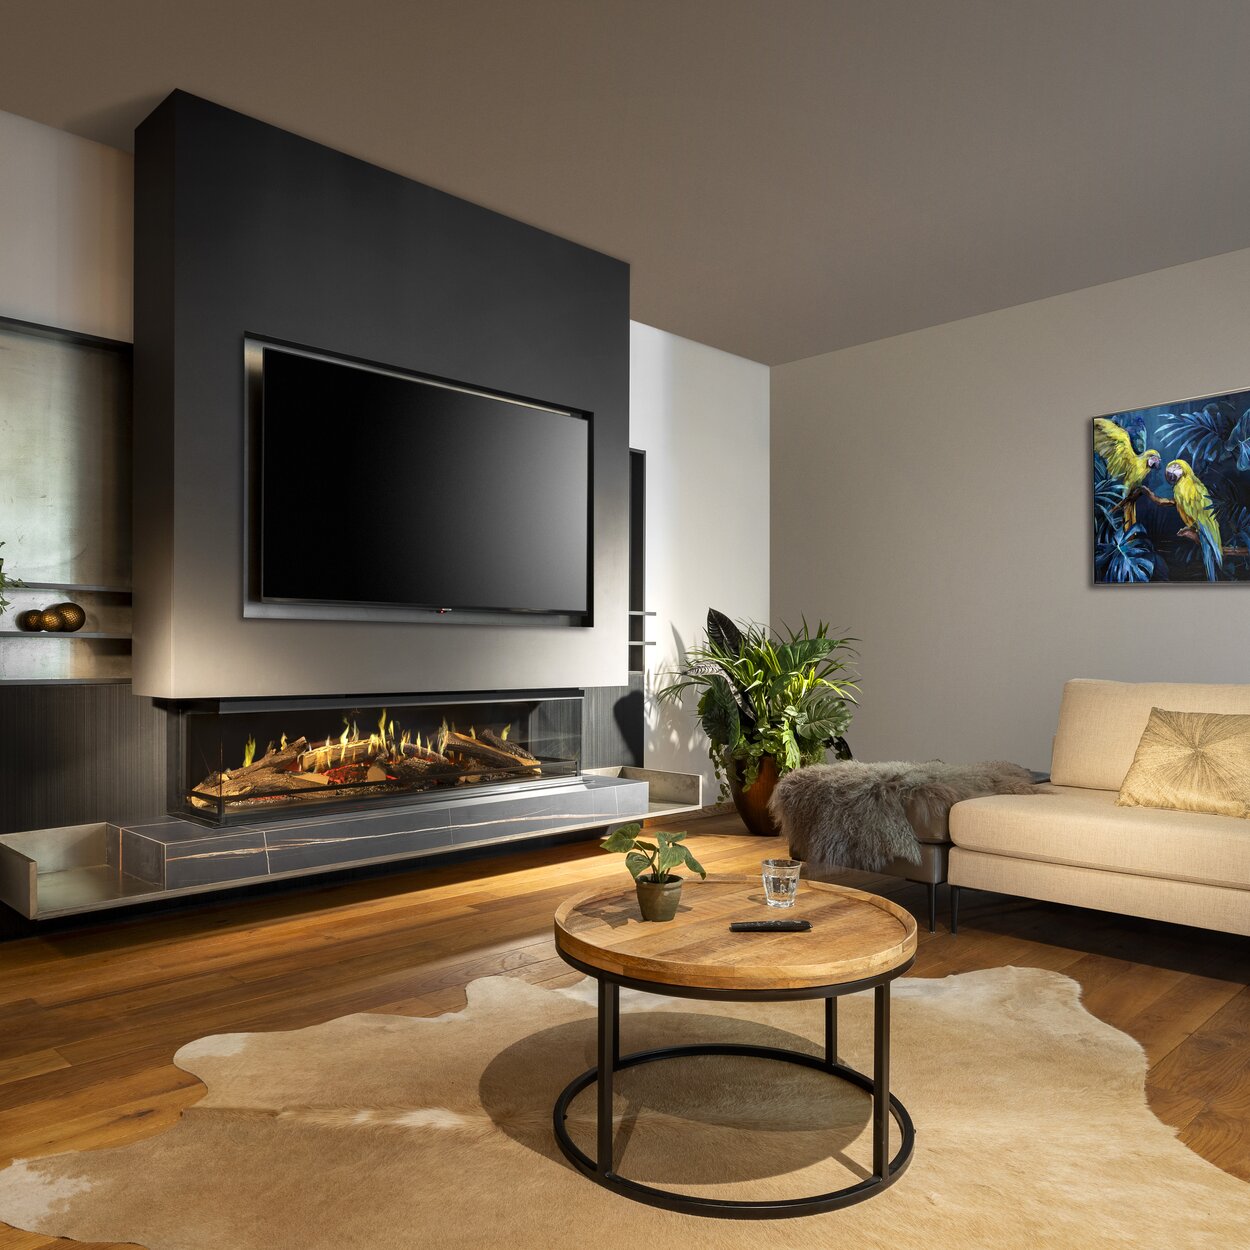 3-sided electric fire E-One 160 S built into a black sideboard including TV.